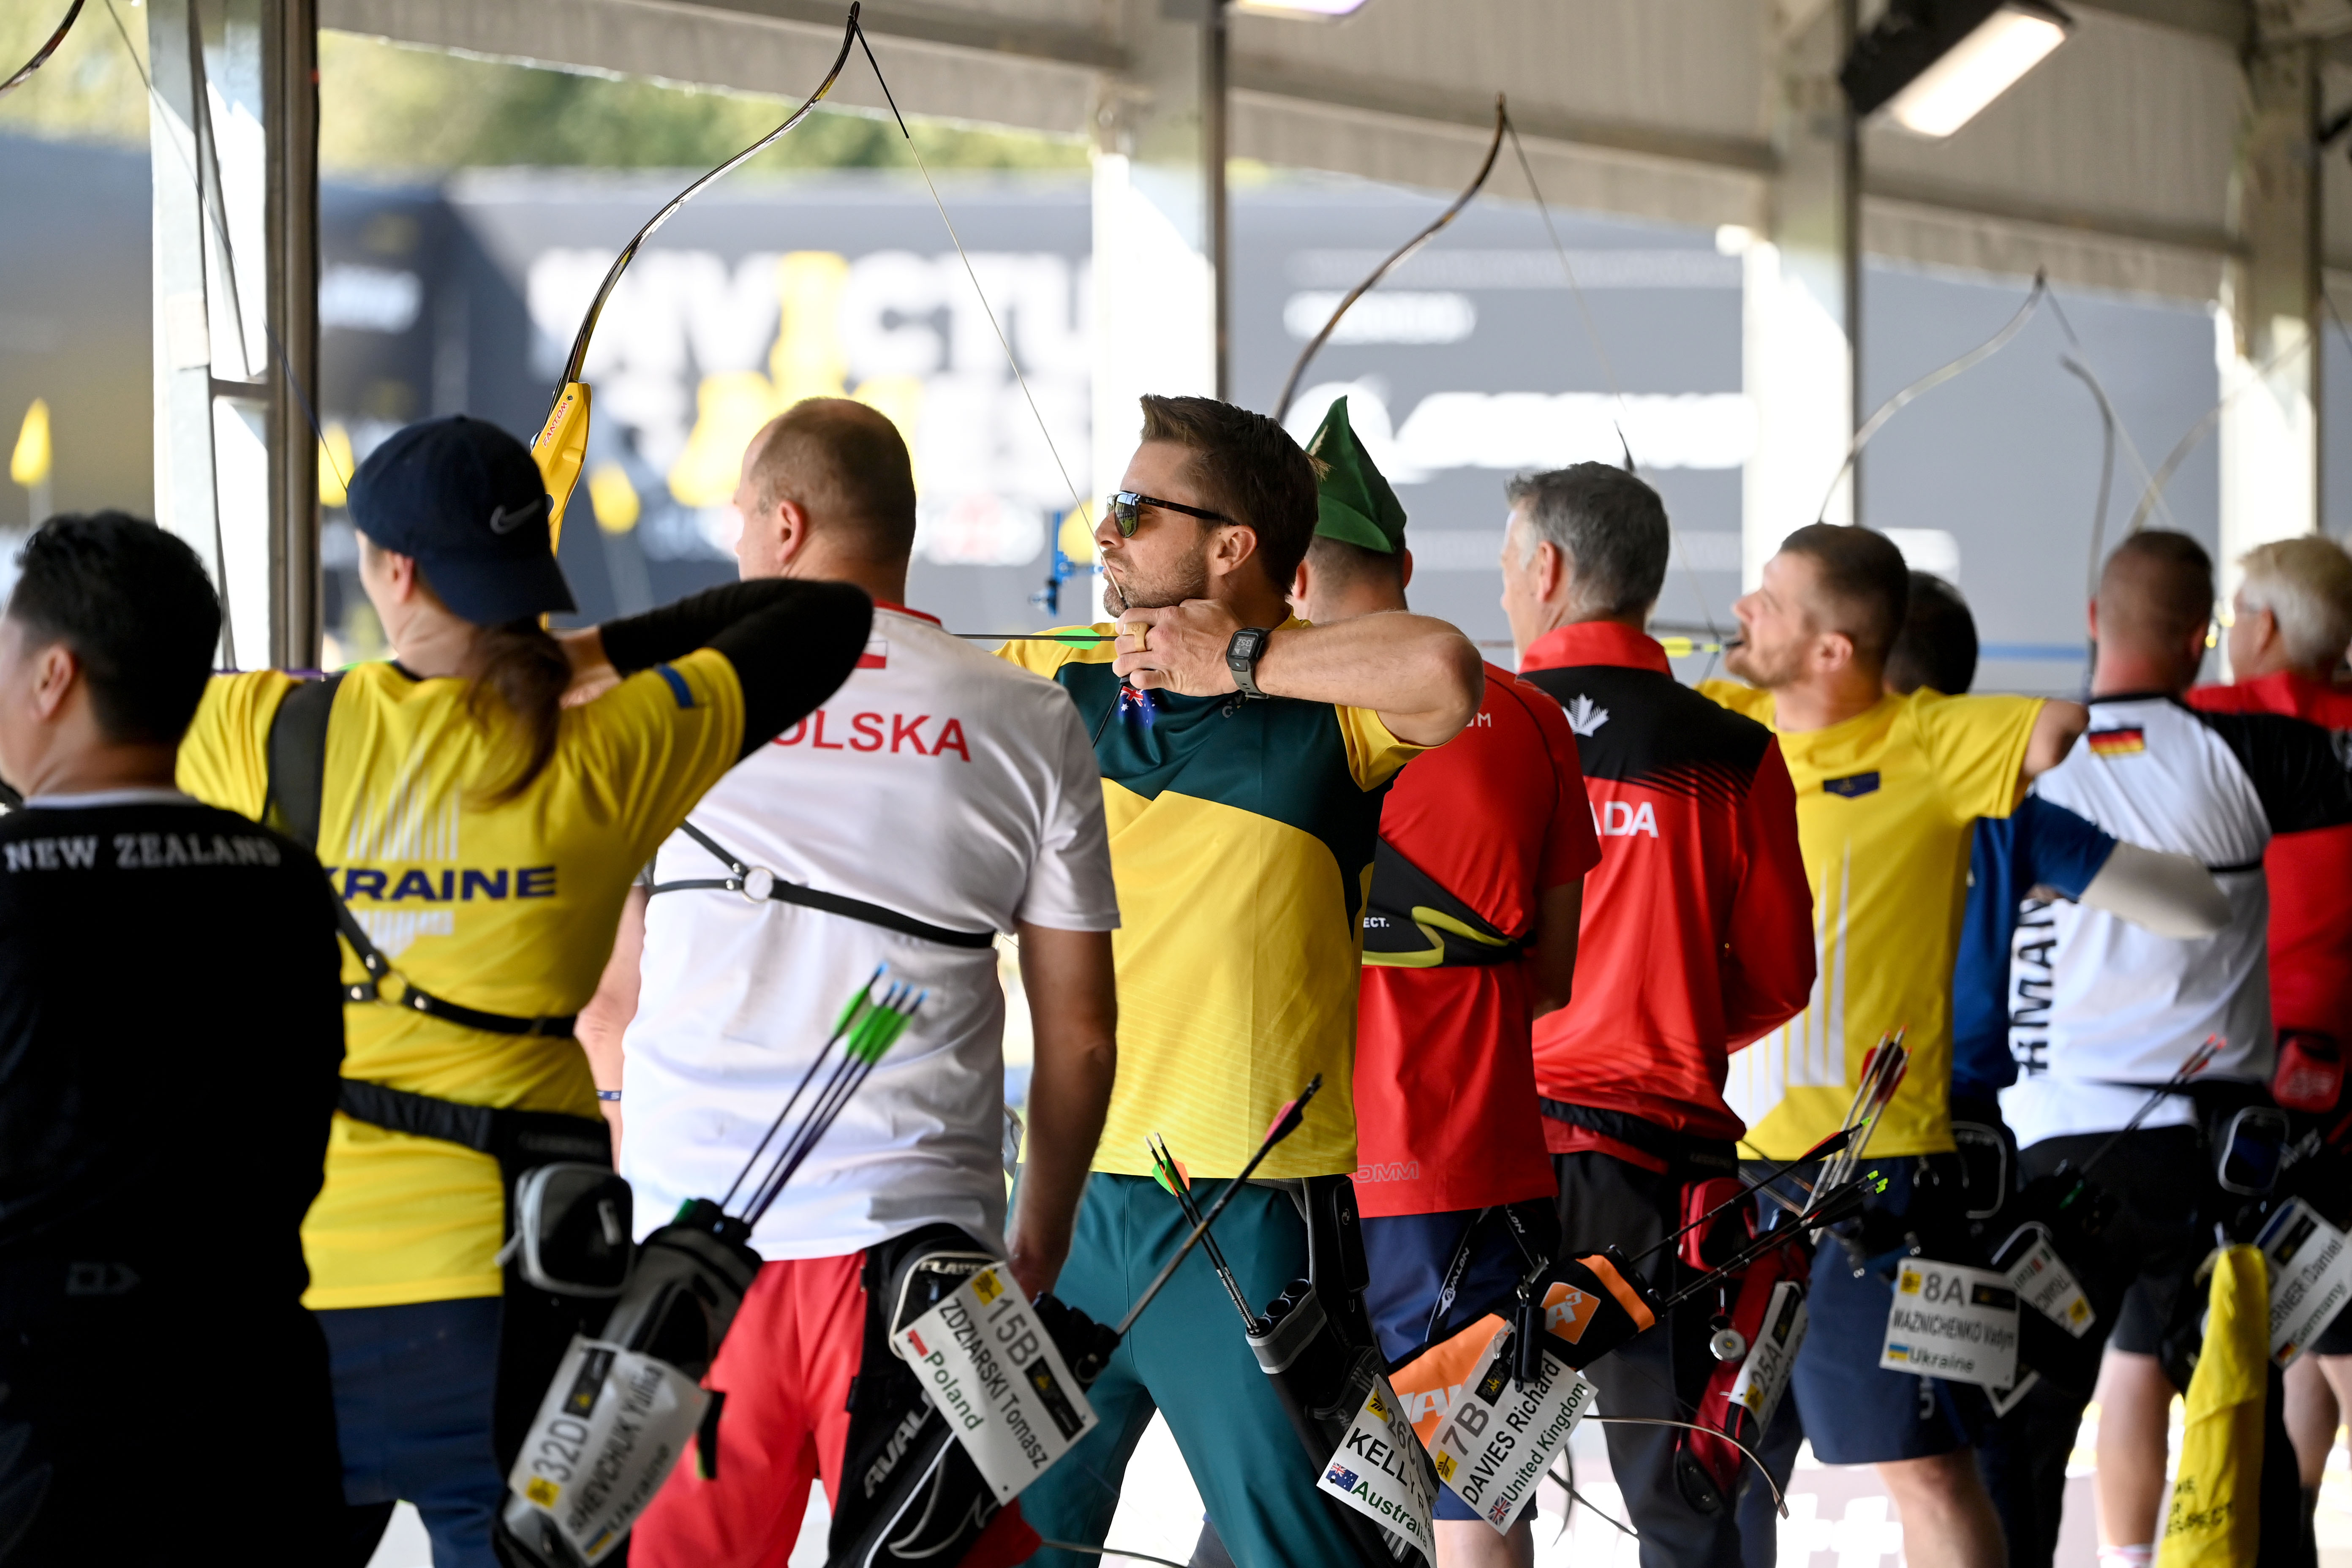 Ryan Kelly competes in the archery at Invictus Games Dusseldorf 2023